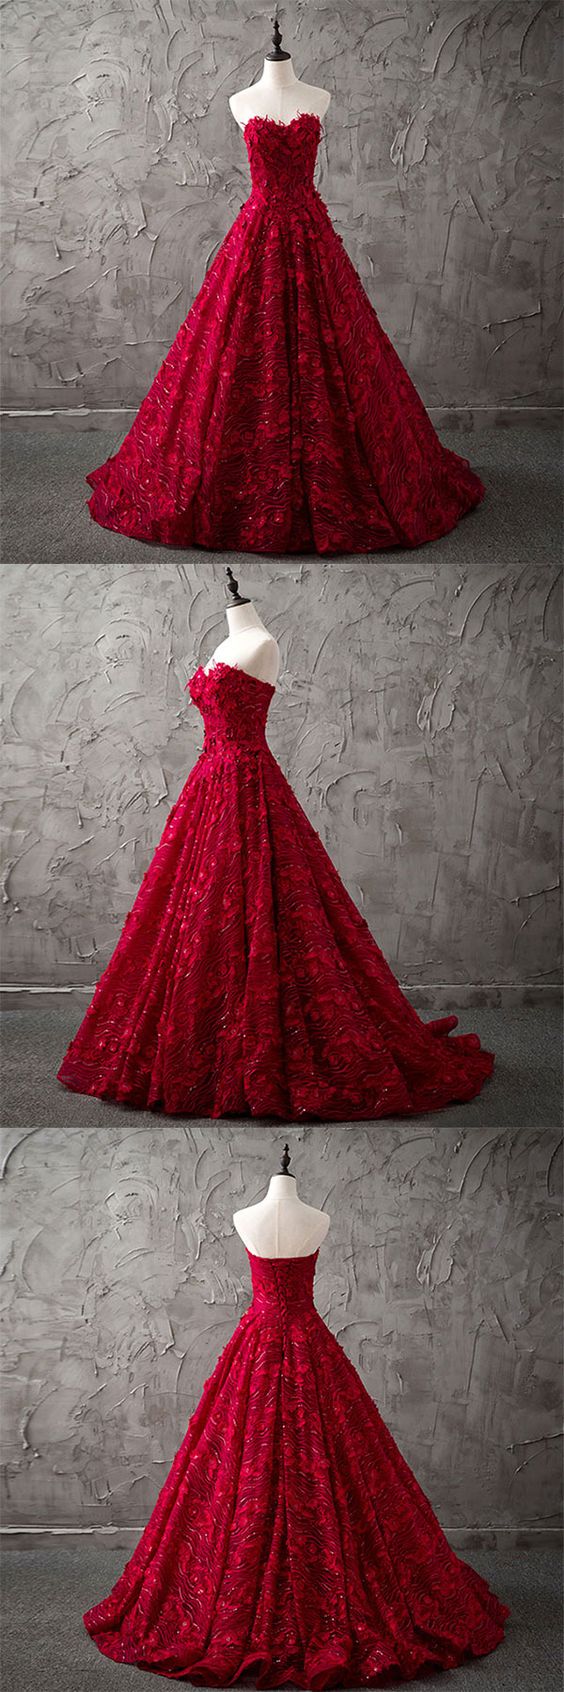 Burgundy Lace A Line Long Prom Dresses Custom Made Women Party Gowns ,2019 Formal Evening Dress